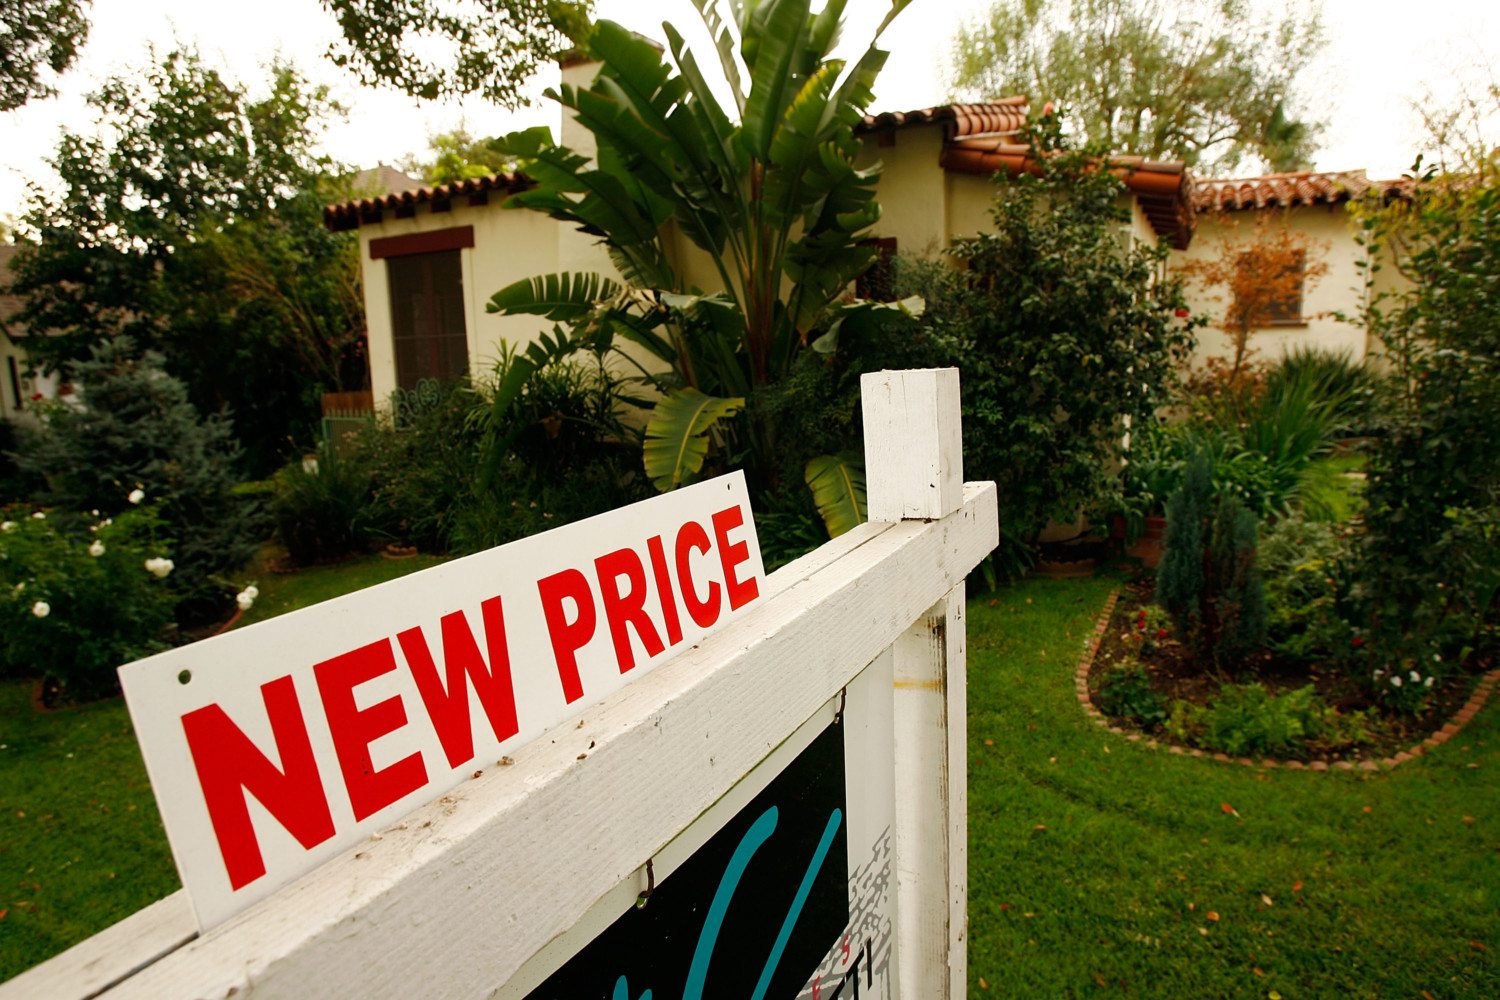 S&P Index Reports Record Drop In U.S. Home Prices